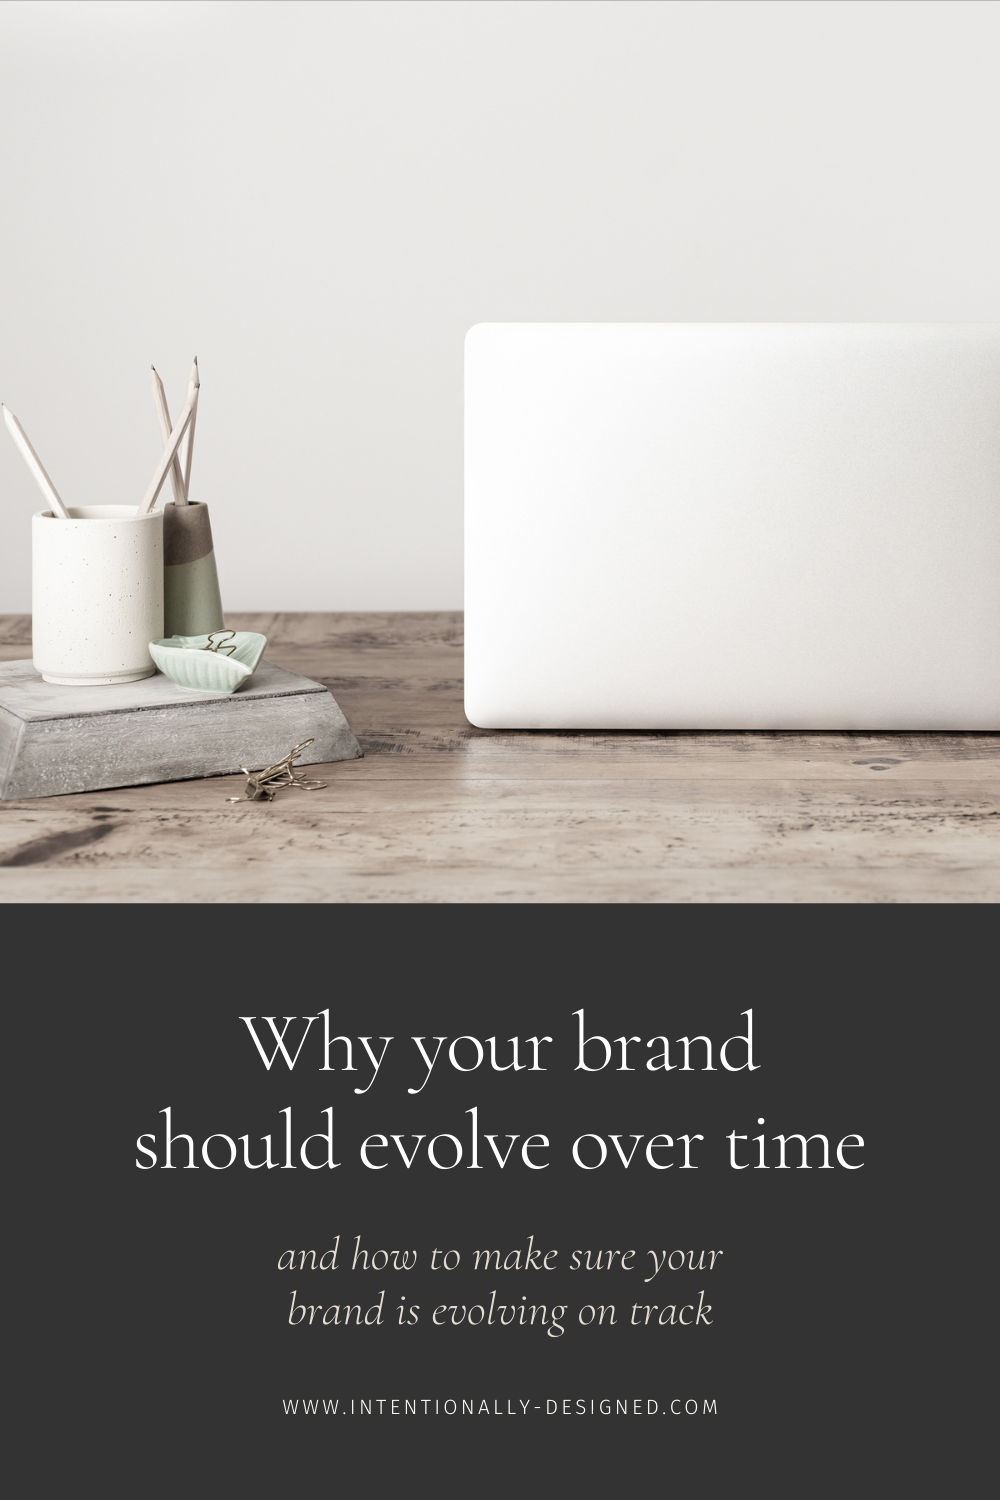 Evolution of your brand